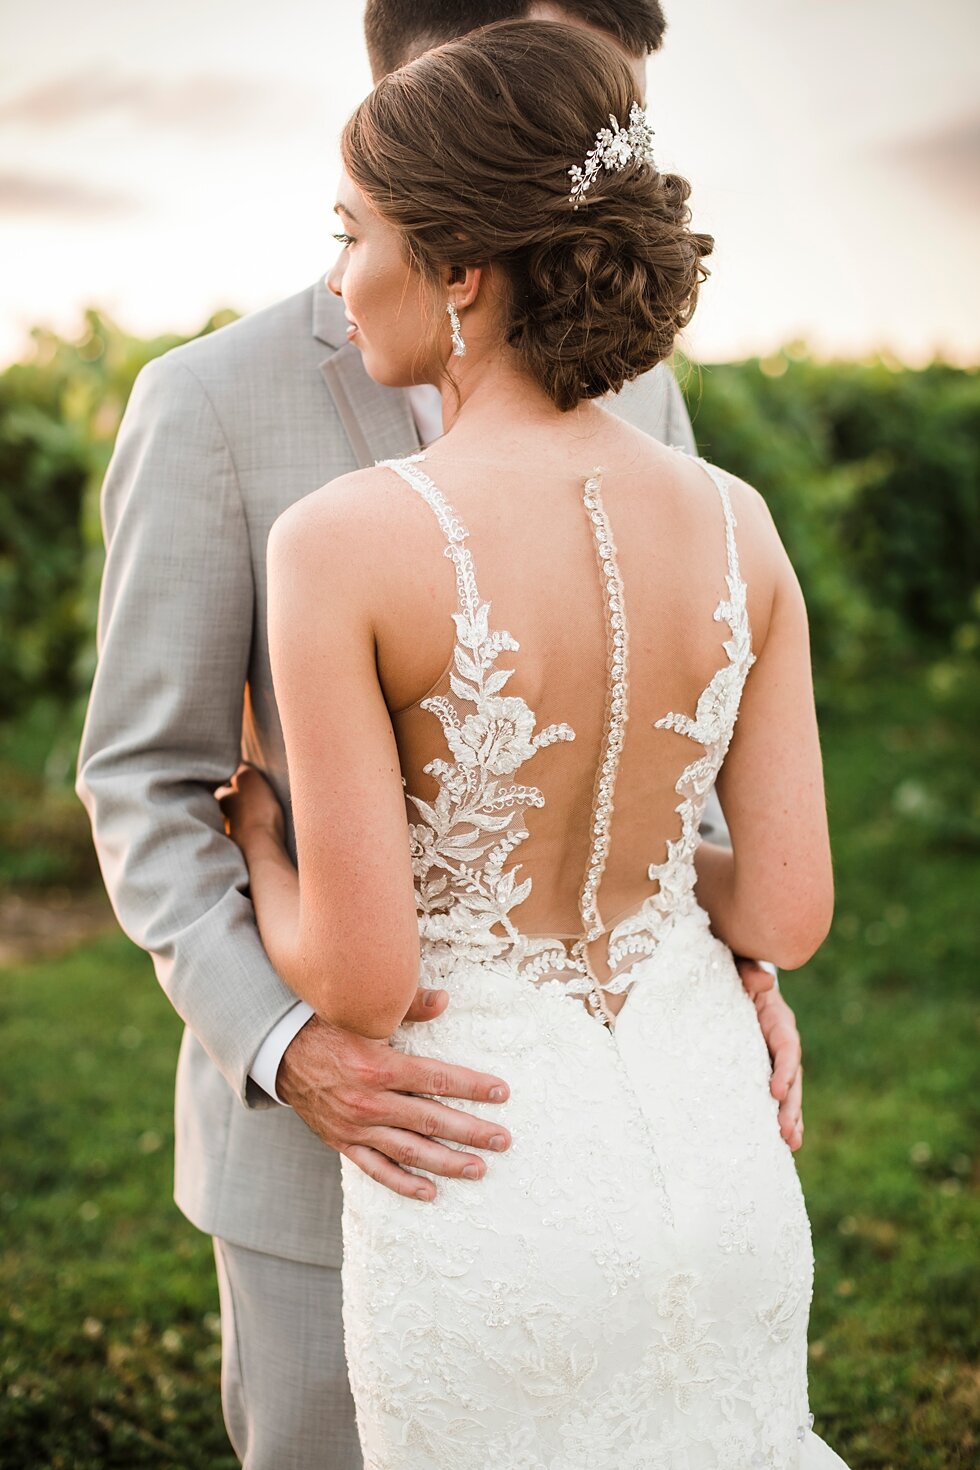  The bride shows off her lace and sheer wedding dress back as she holds her new husband outside as the sun sets. wedding ceremony details stunning photography married midwest louisville kentucky #weddingphoto #love #justmarried #midwestphotographer #